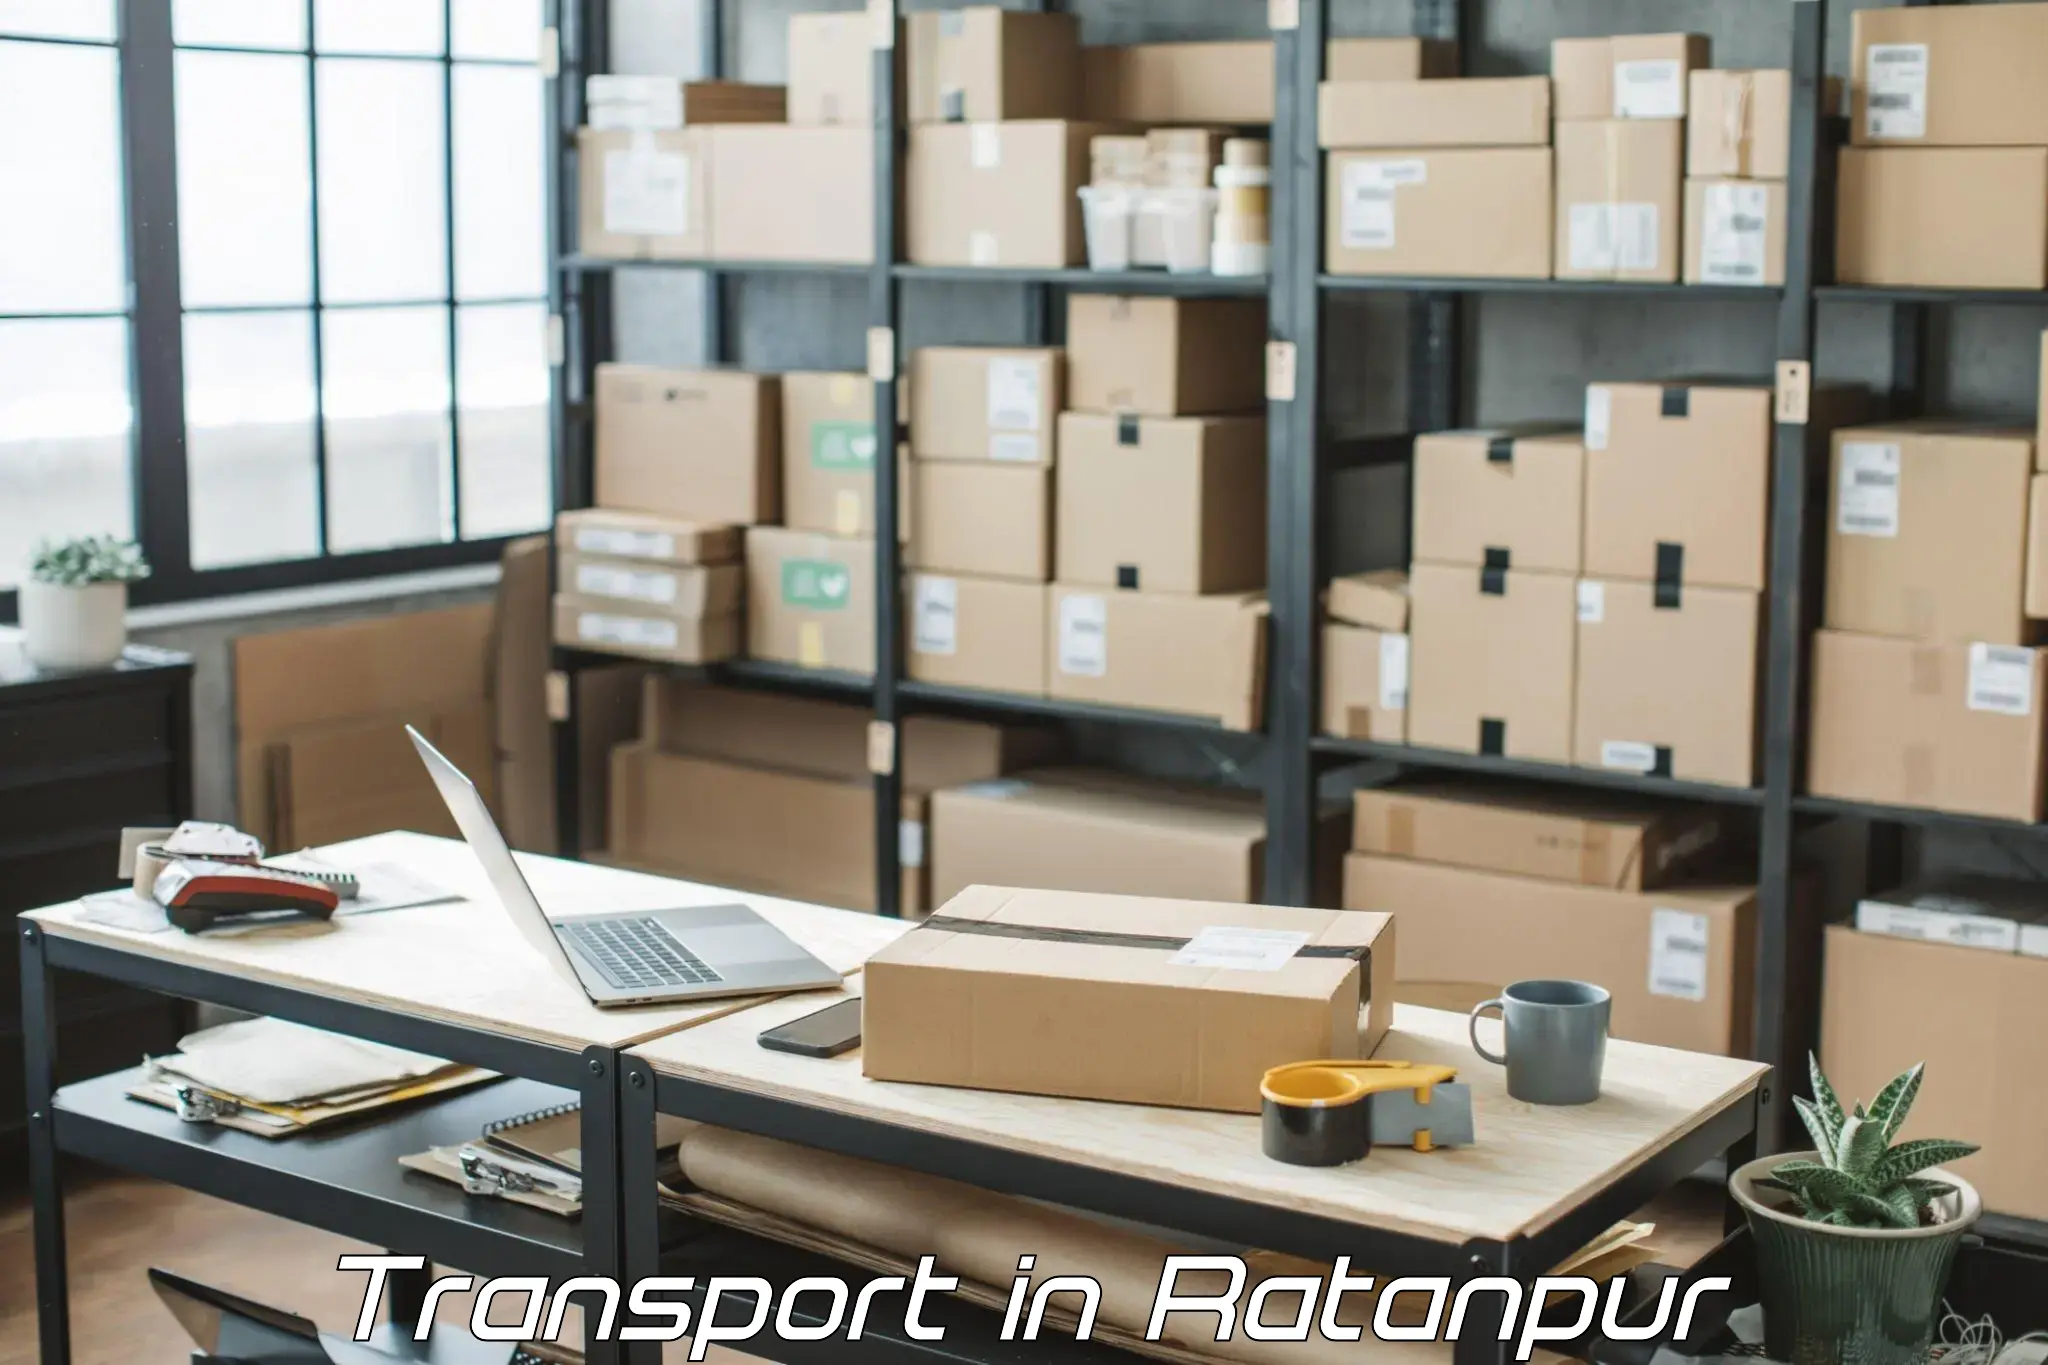 Land transport services in Ratanpur